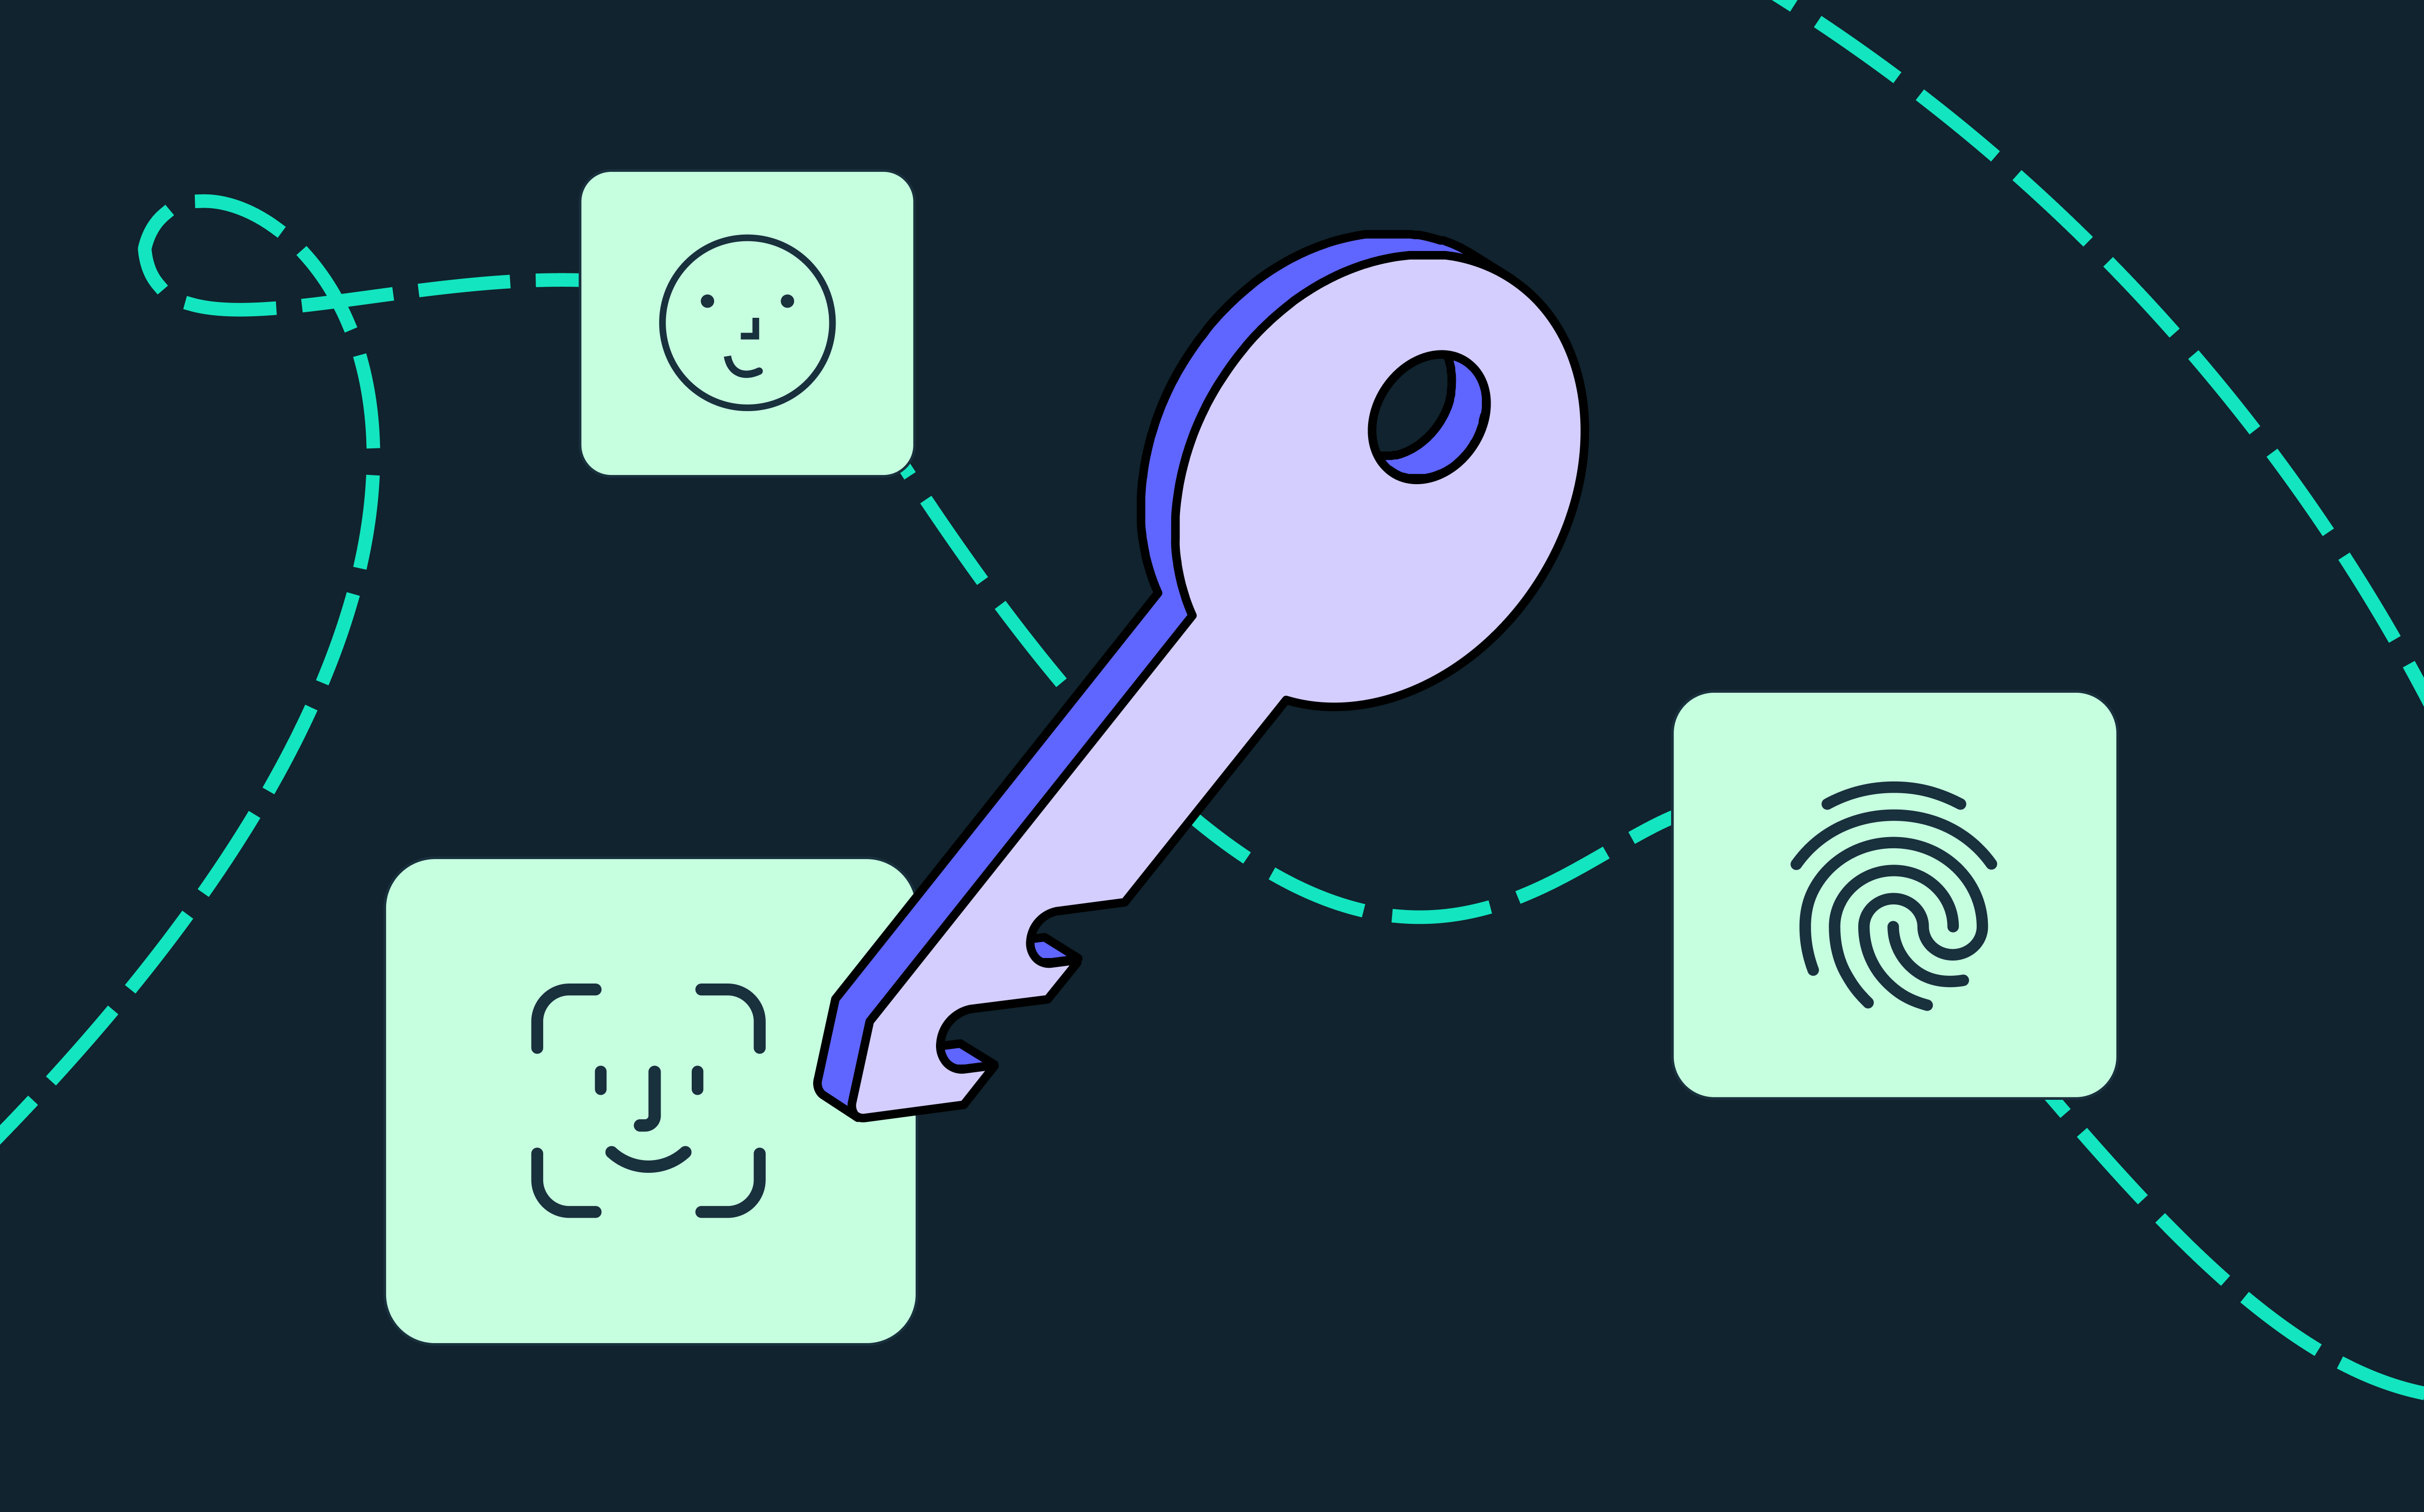 A collage of icons representing different biometric factors (face, thumb) with a key to represent passkey-based authentication